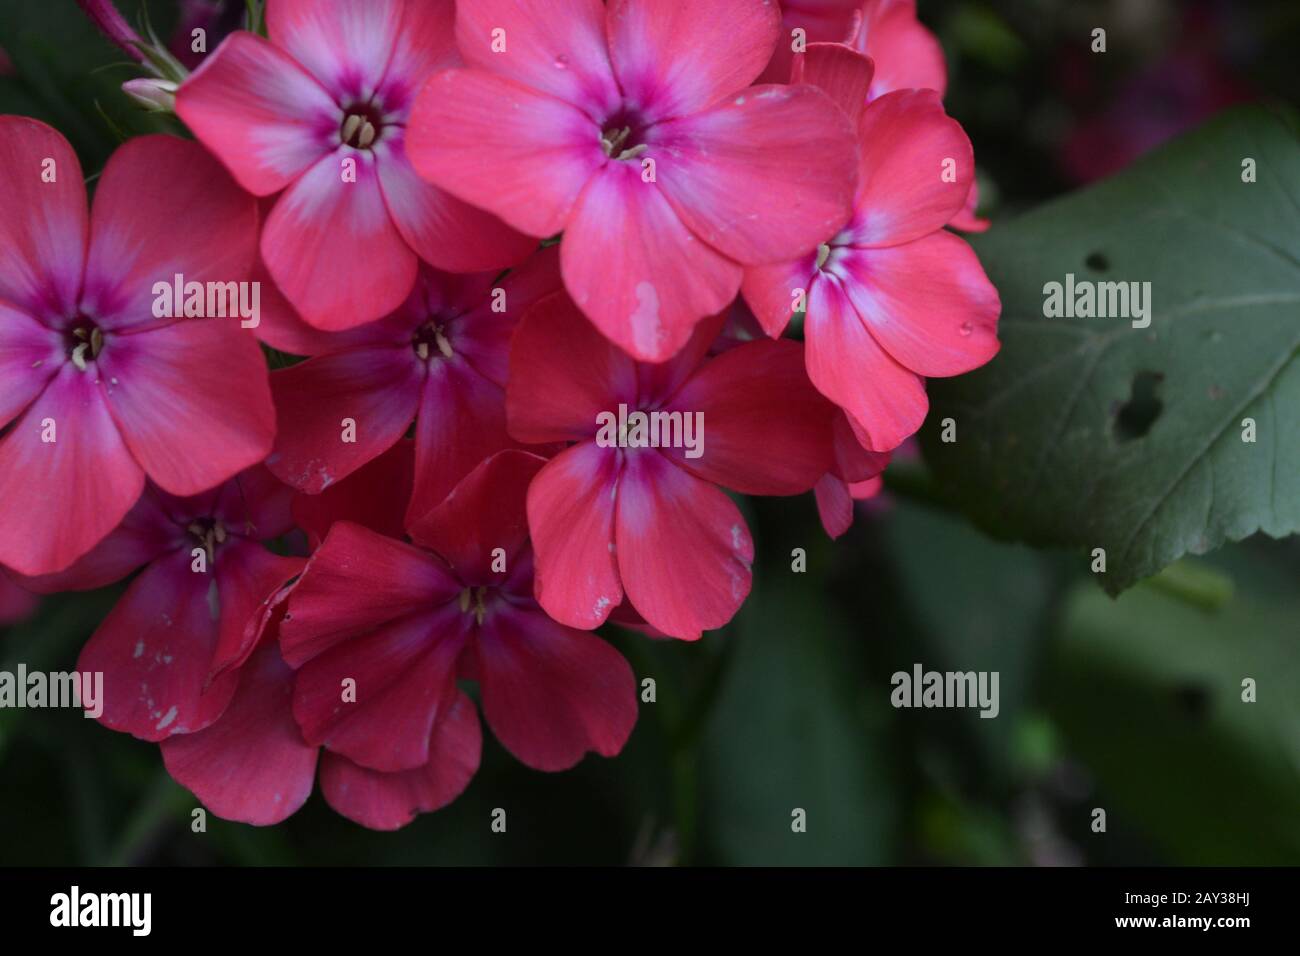 Phlox. Polemoniaceae. Beautiful inflorescence. Flowers pink. Nice smell. Flowerbed. Garden. Floriculture. On blurred background. Close-up. Horizontal Stock Photo